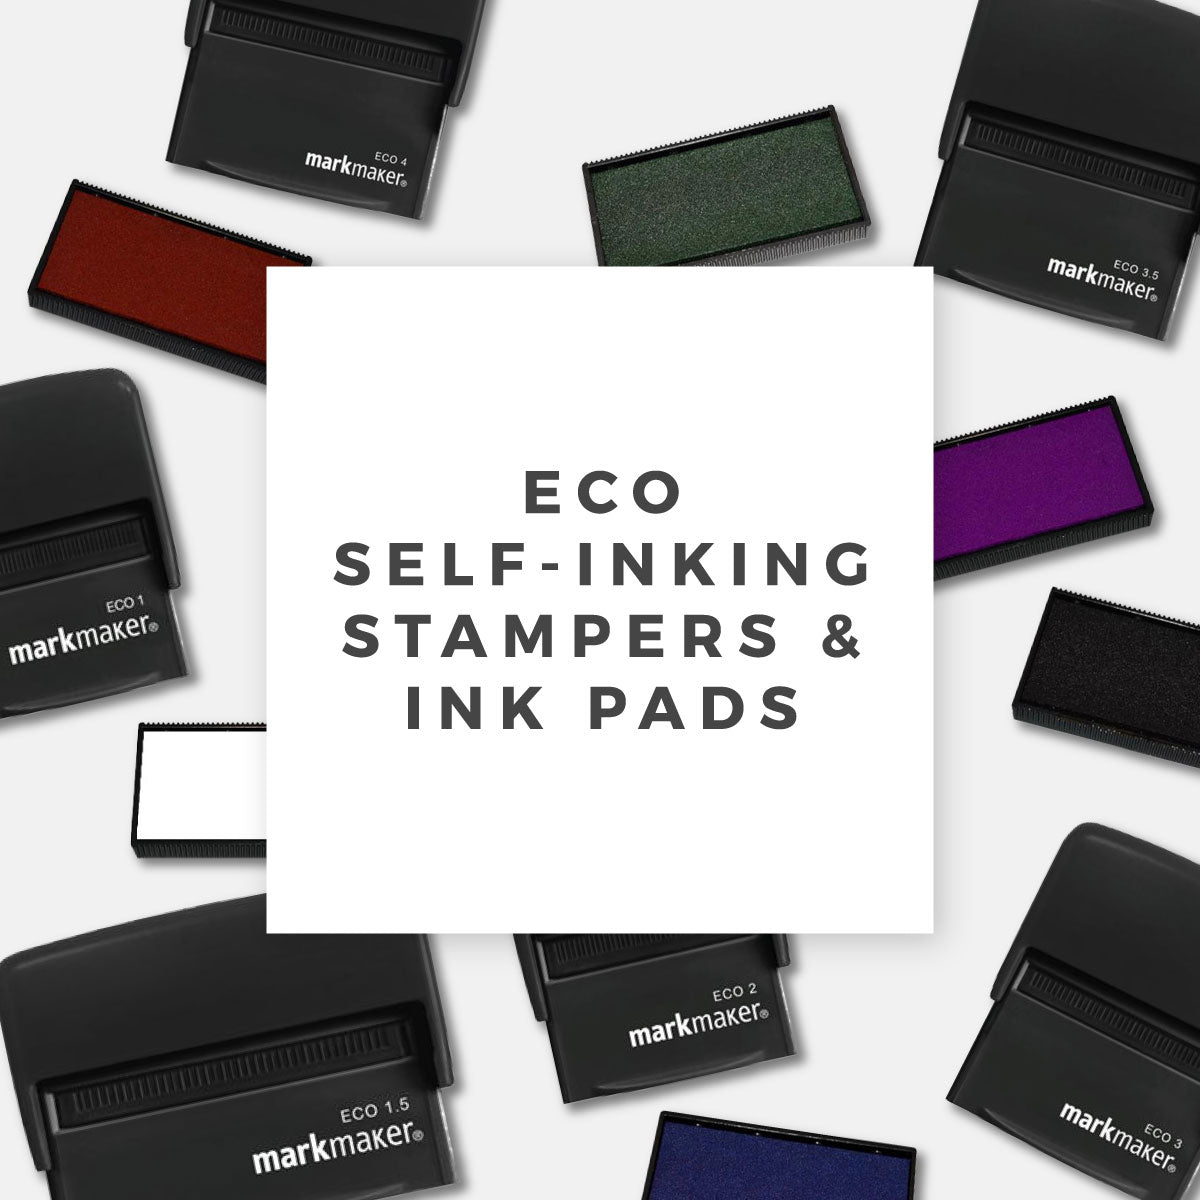 ECO Self-Inking Stampers & Ink Pads